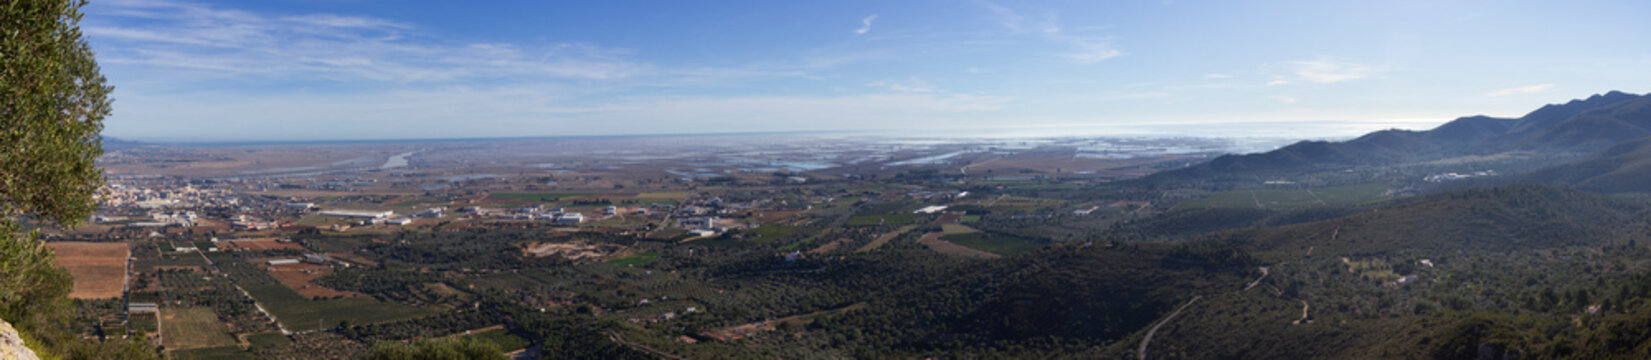 View from Montsianell looking towards Amposta, Montsia, Deltebre, Ebro Delta, and the Mediterranean in Catalonia, Spain.